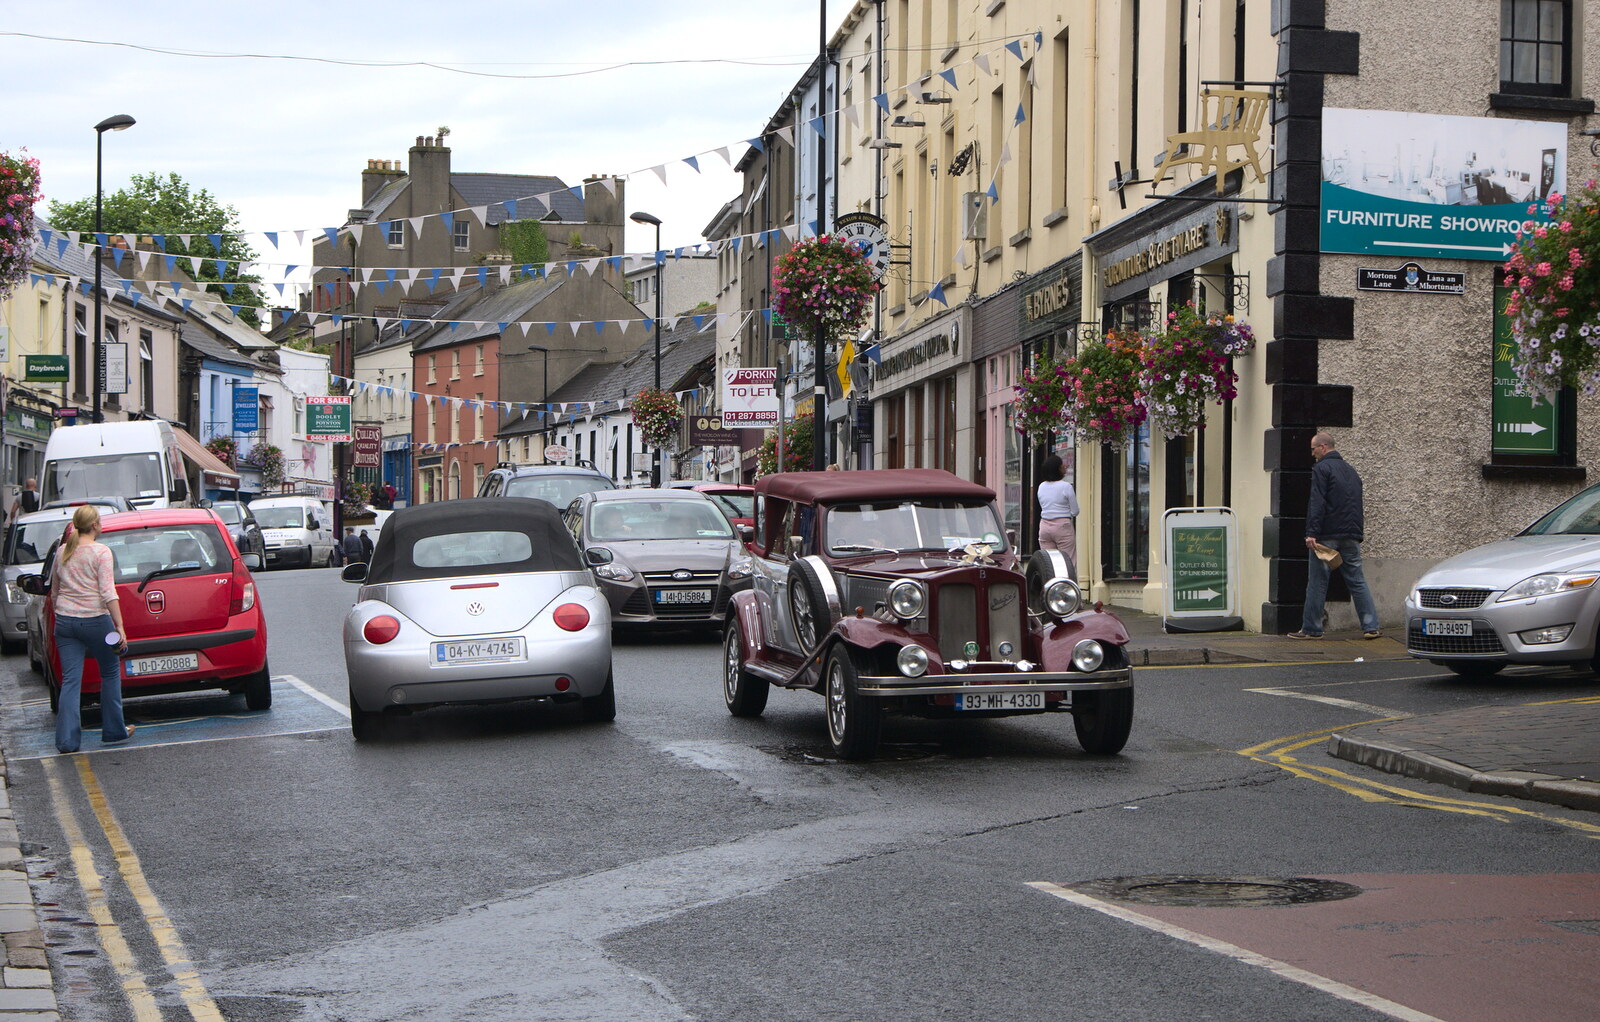 A cool old car drives through town from Camping at Silver Strand, Wicklow, County Wicklow, Ireland - 7th August 2014